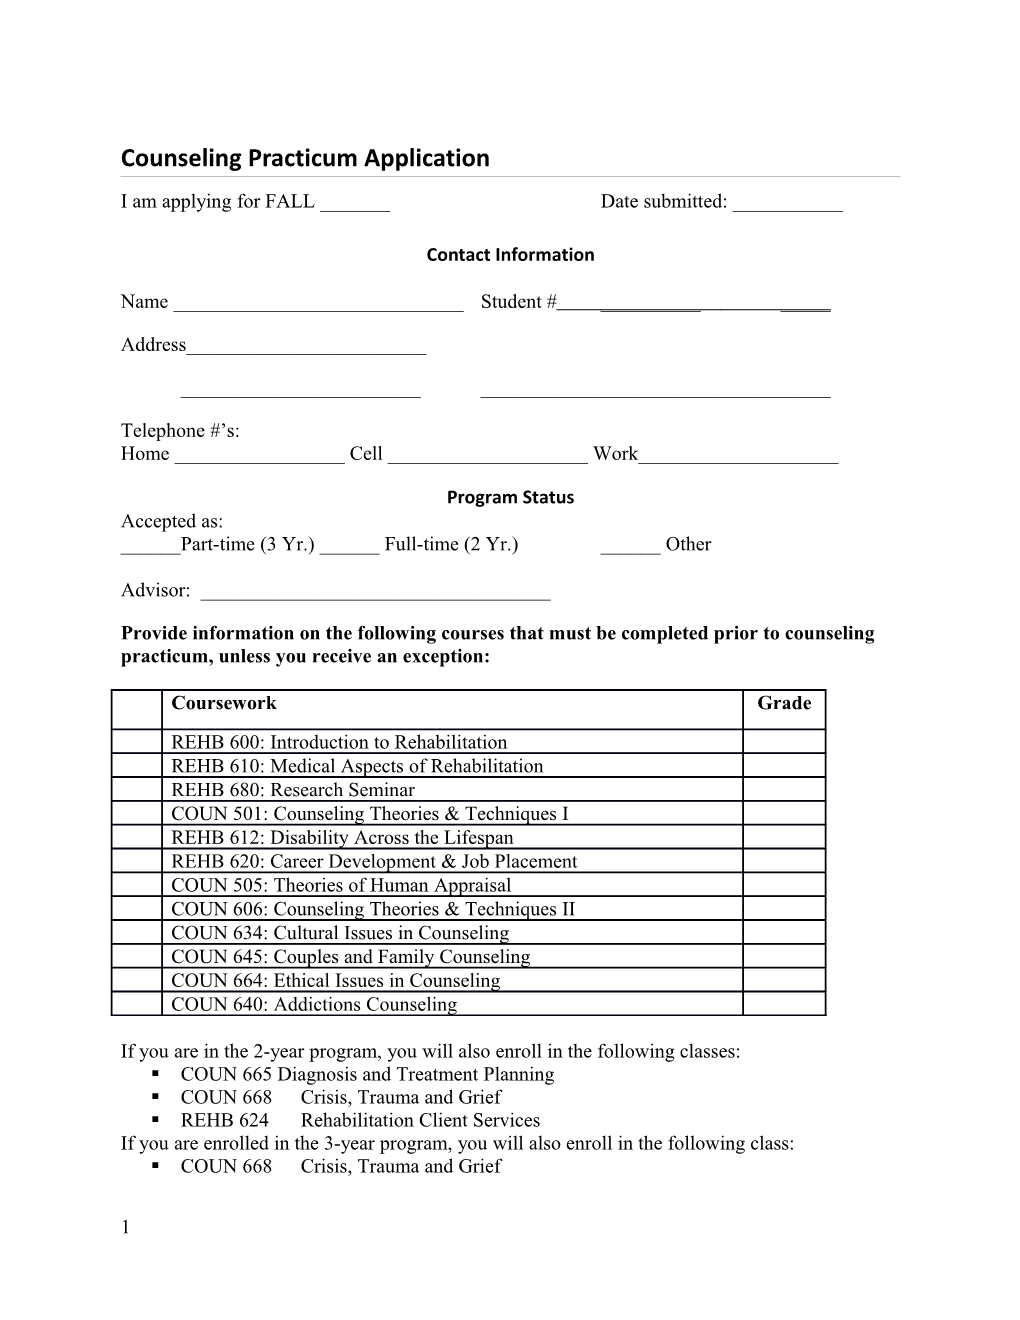 Counseling Practicum Application